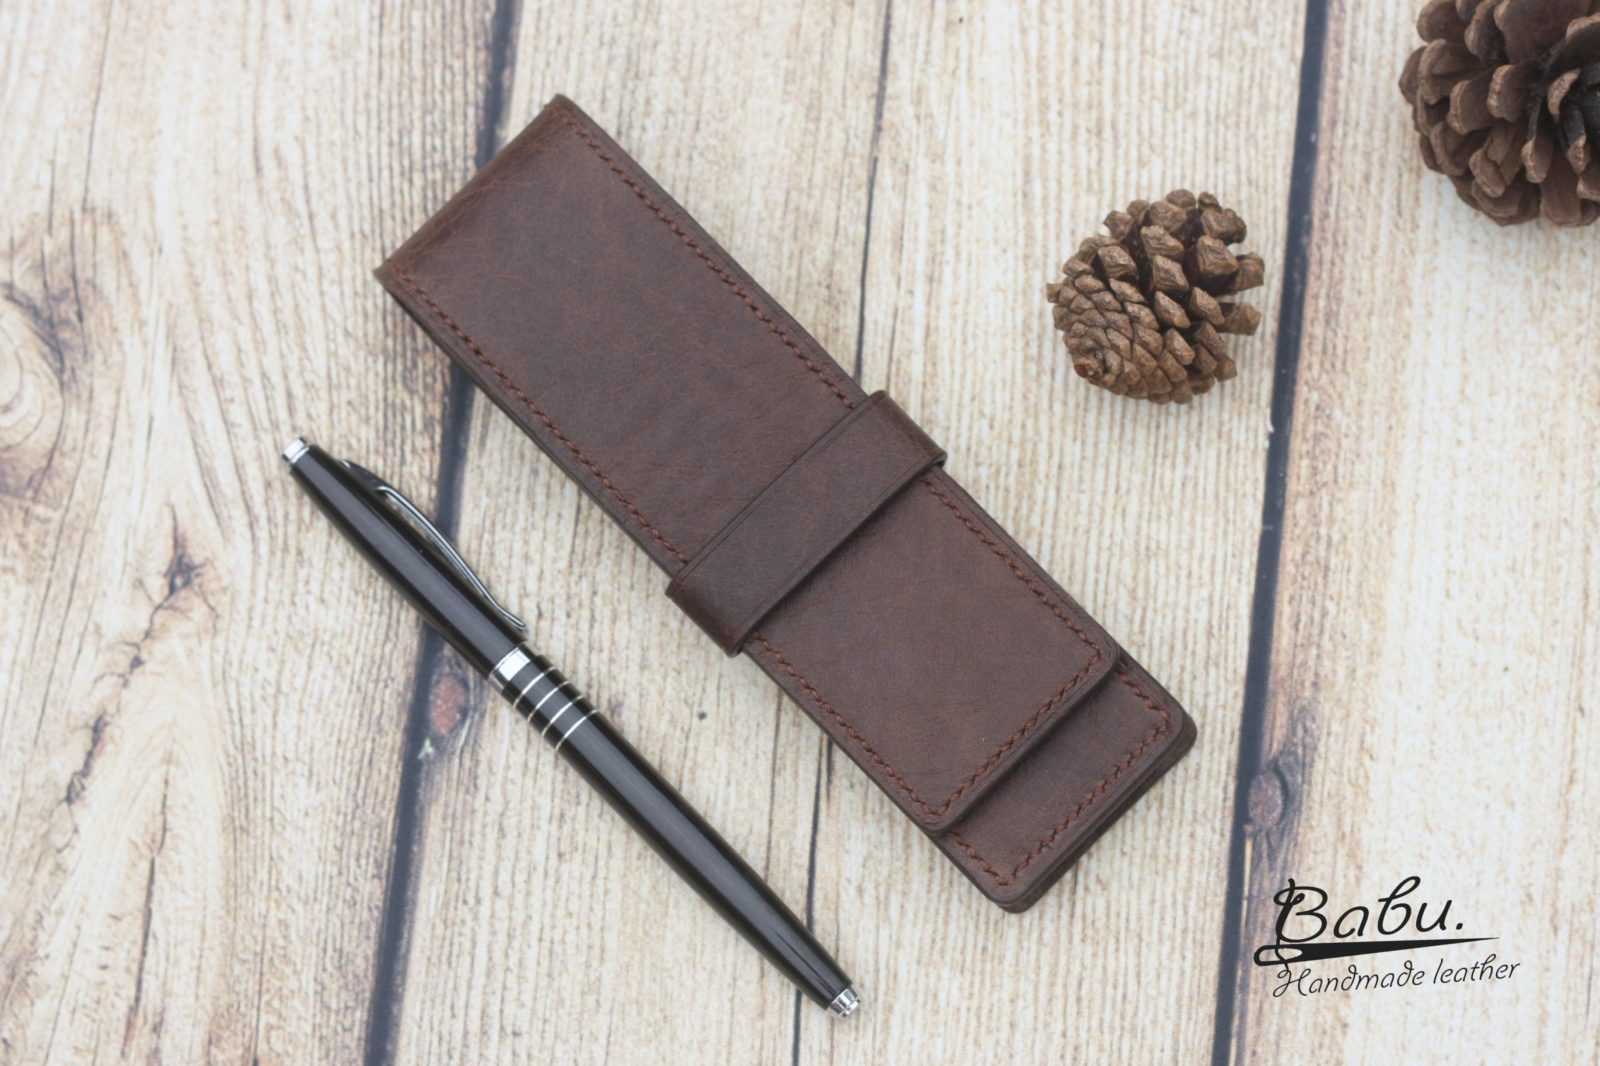 Dark Brown Cow Leather pen holder, Handmade Tuscany leather pen